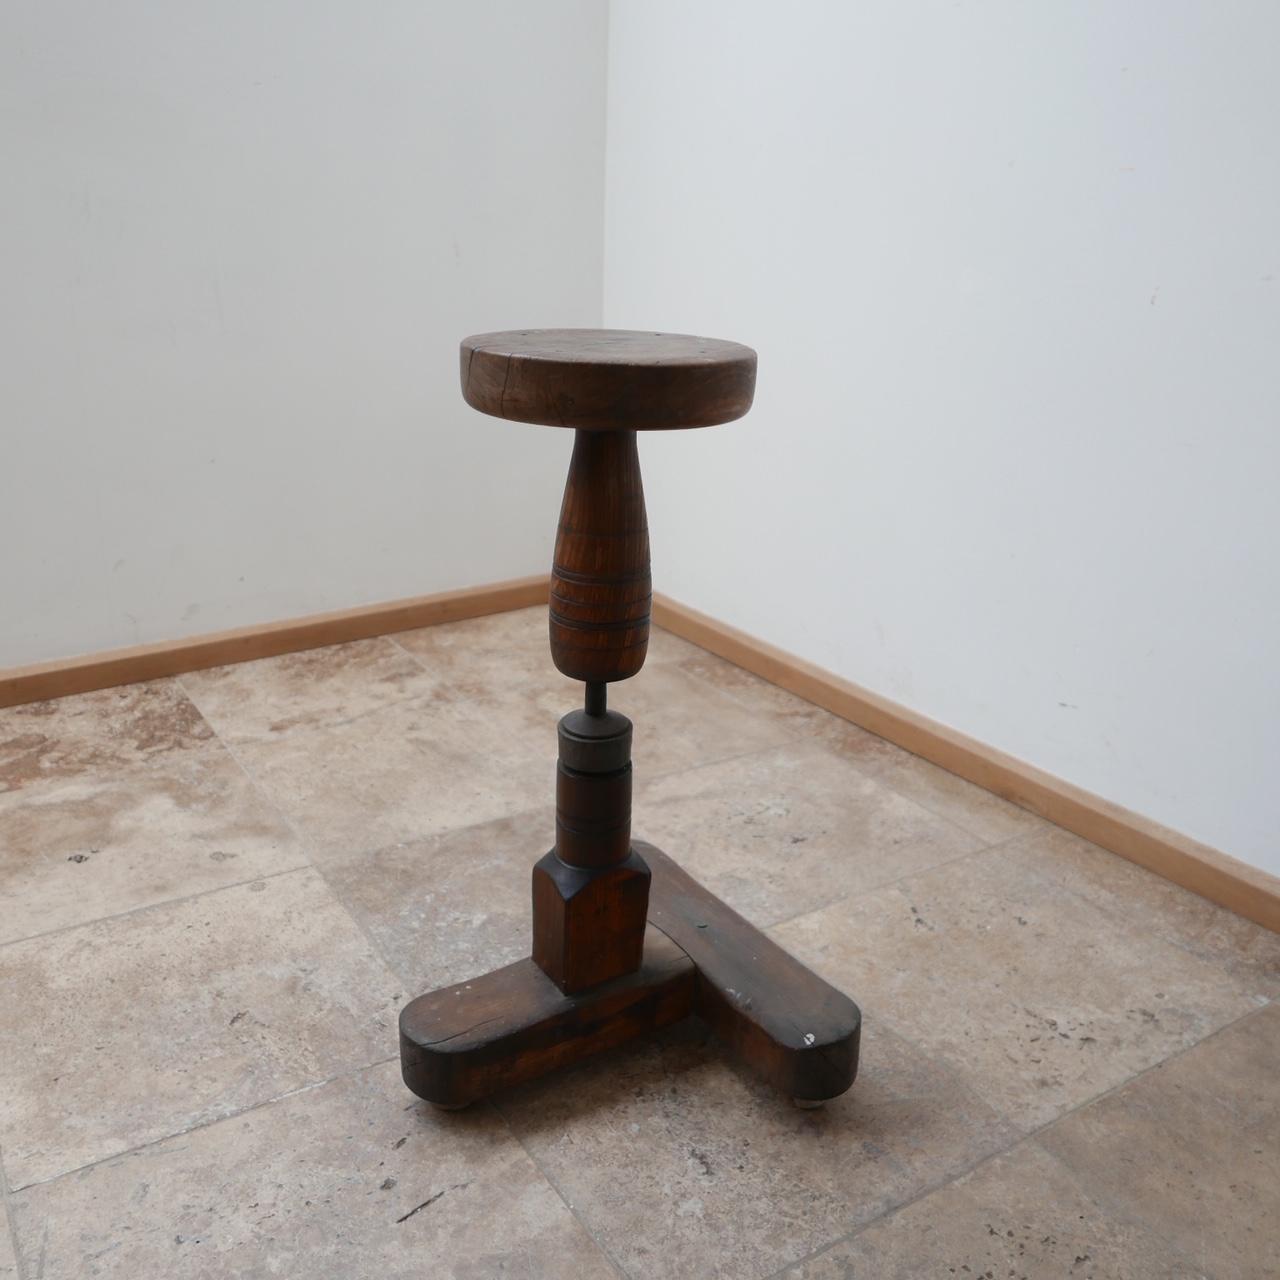 20th Century Antique English Sculpture/Display Stand